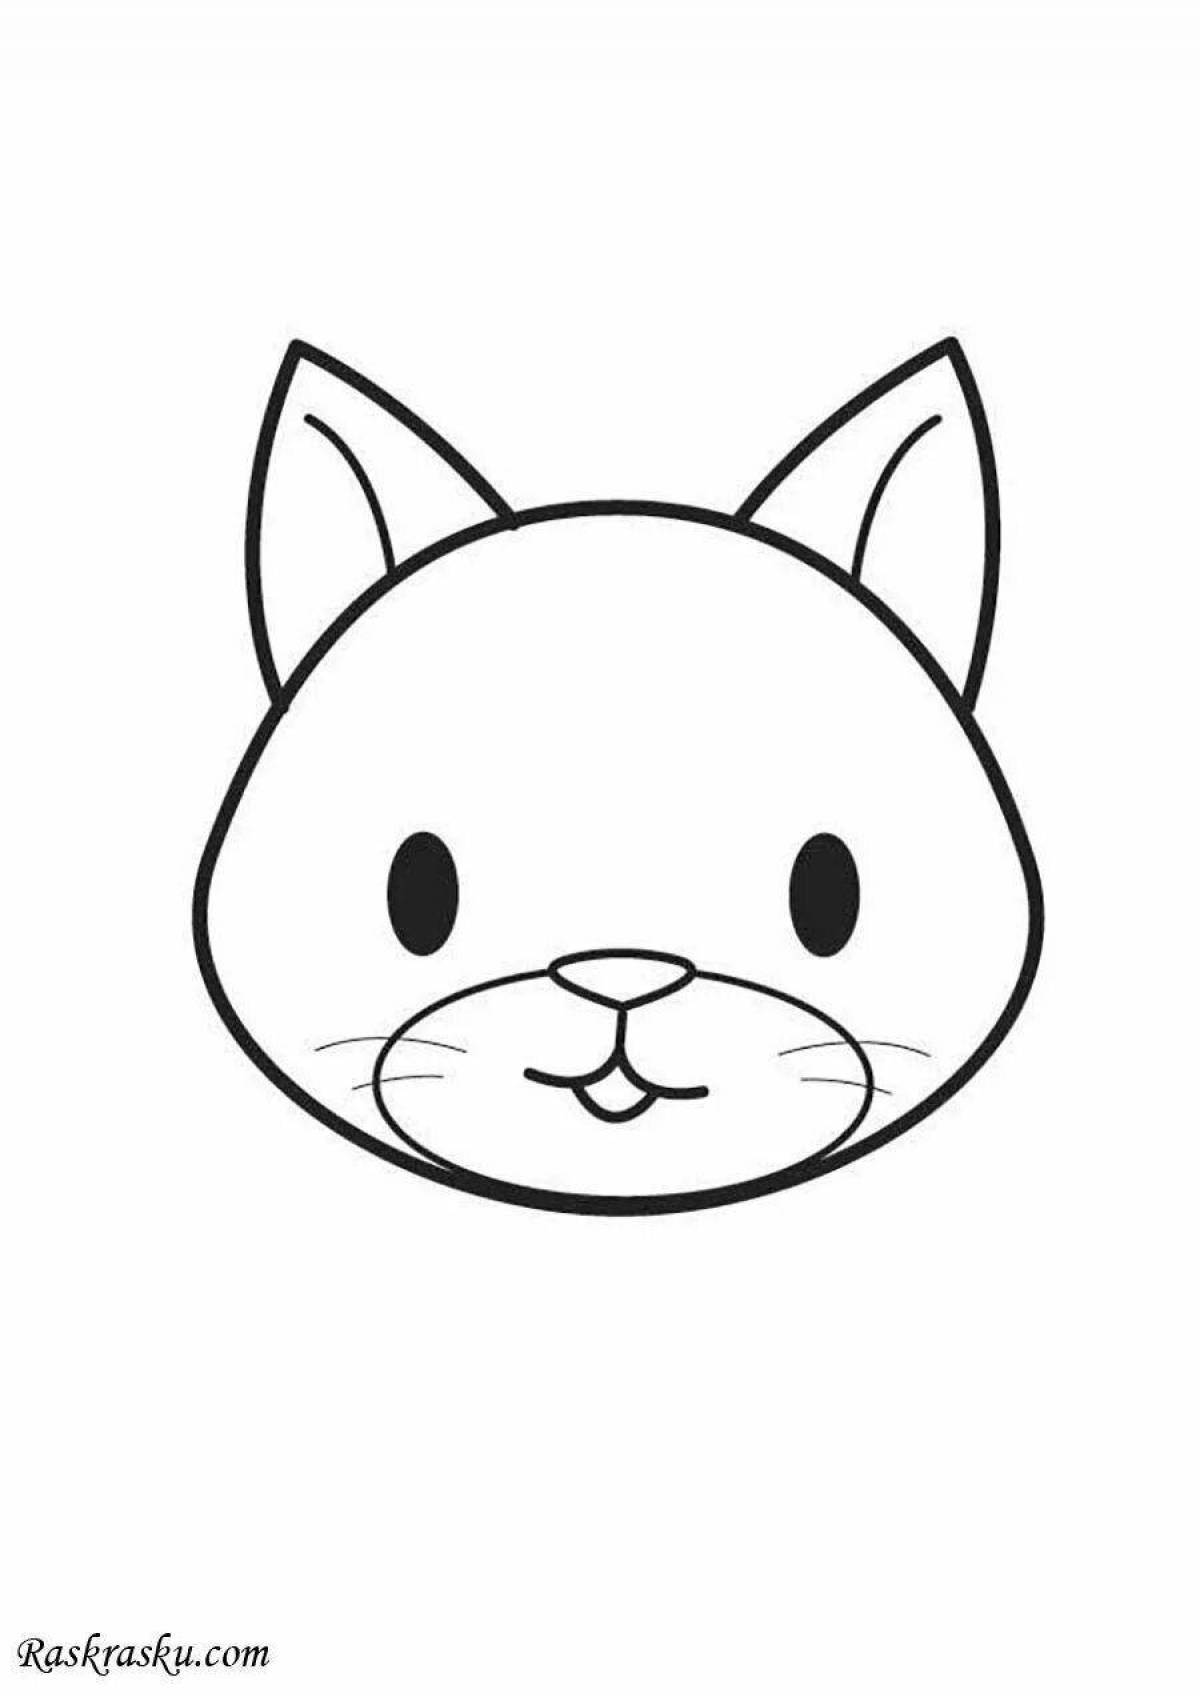 Coloring page witty cat face